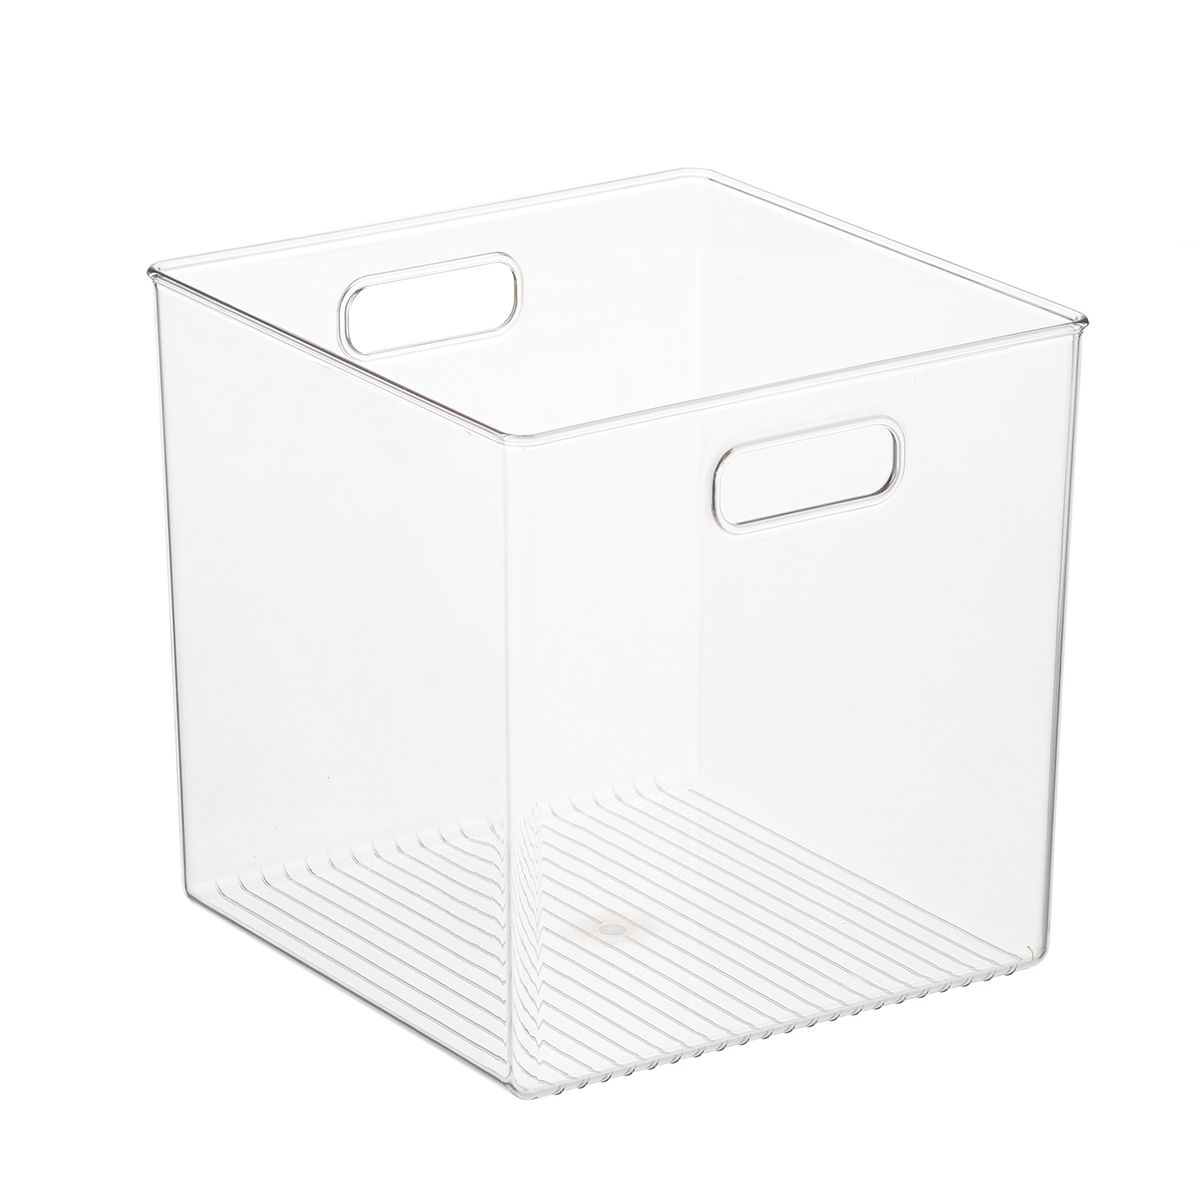 Linus^ Cube Bin w/ Handles | The Container Store